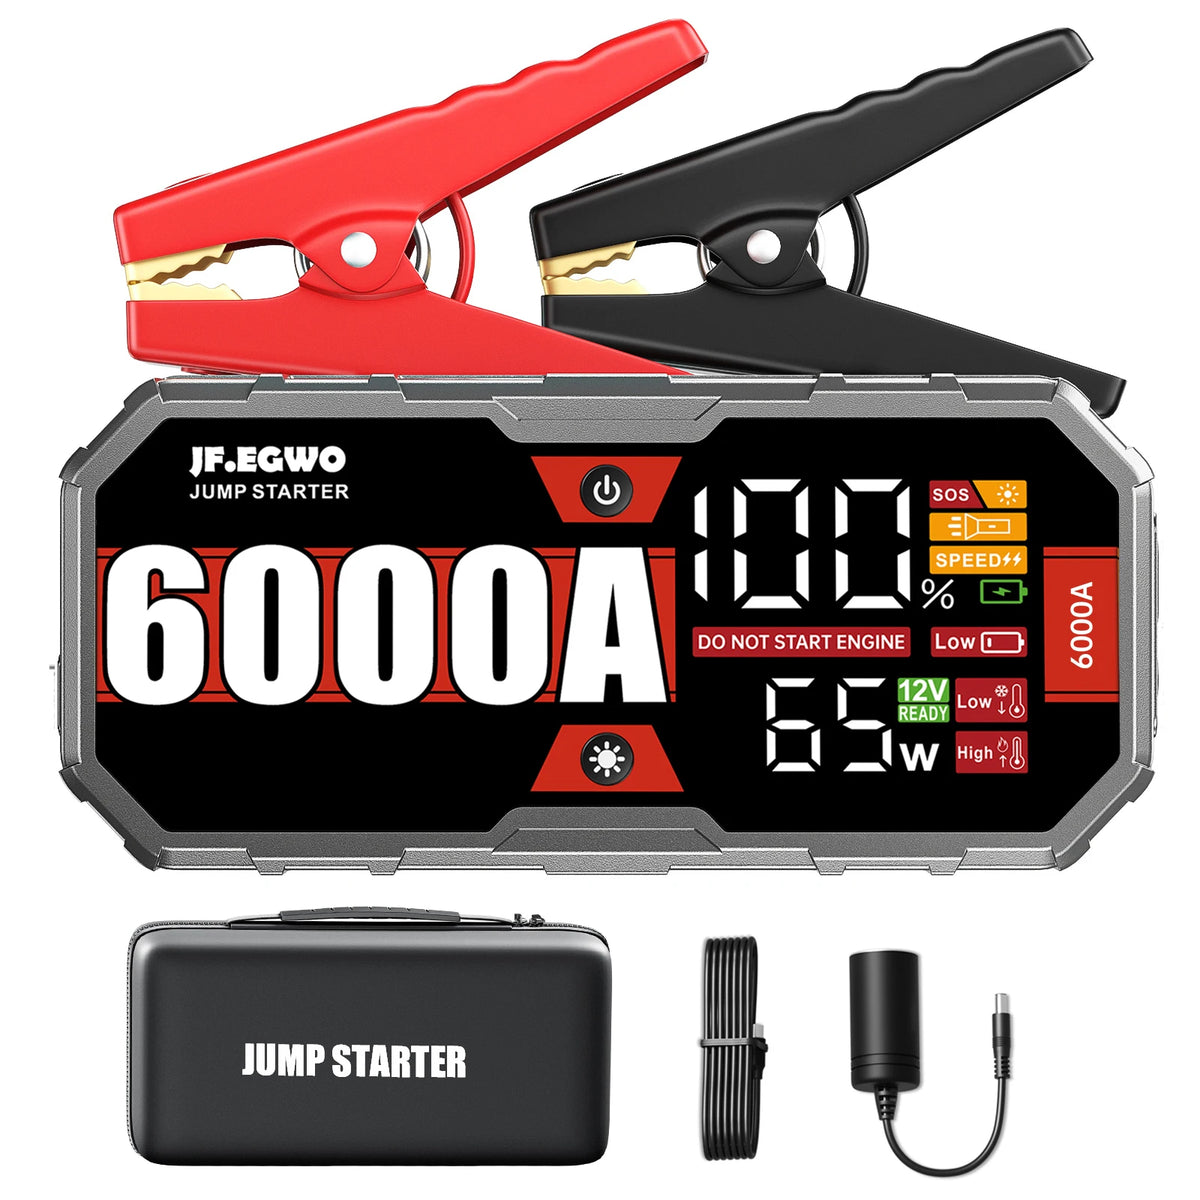 JFEGWO 6000A Jump Starter Car Battery Booster 65W Fast Charging Total 230W Power Bank, Pro